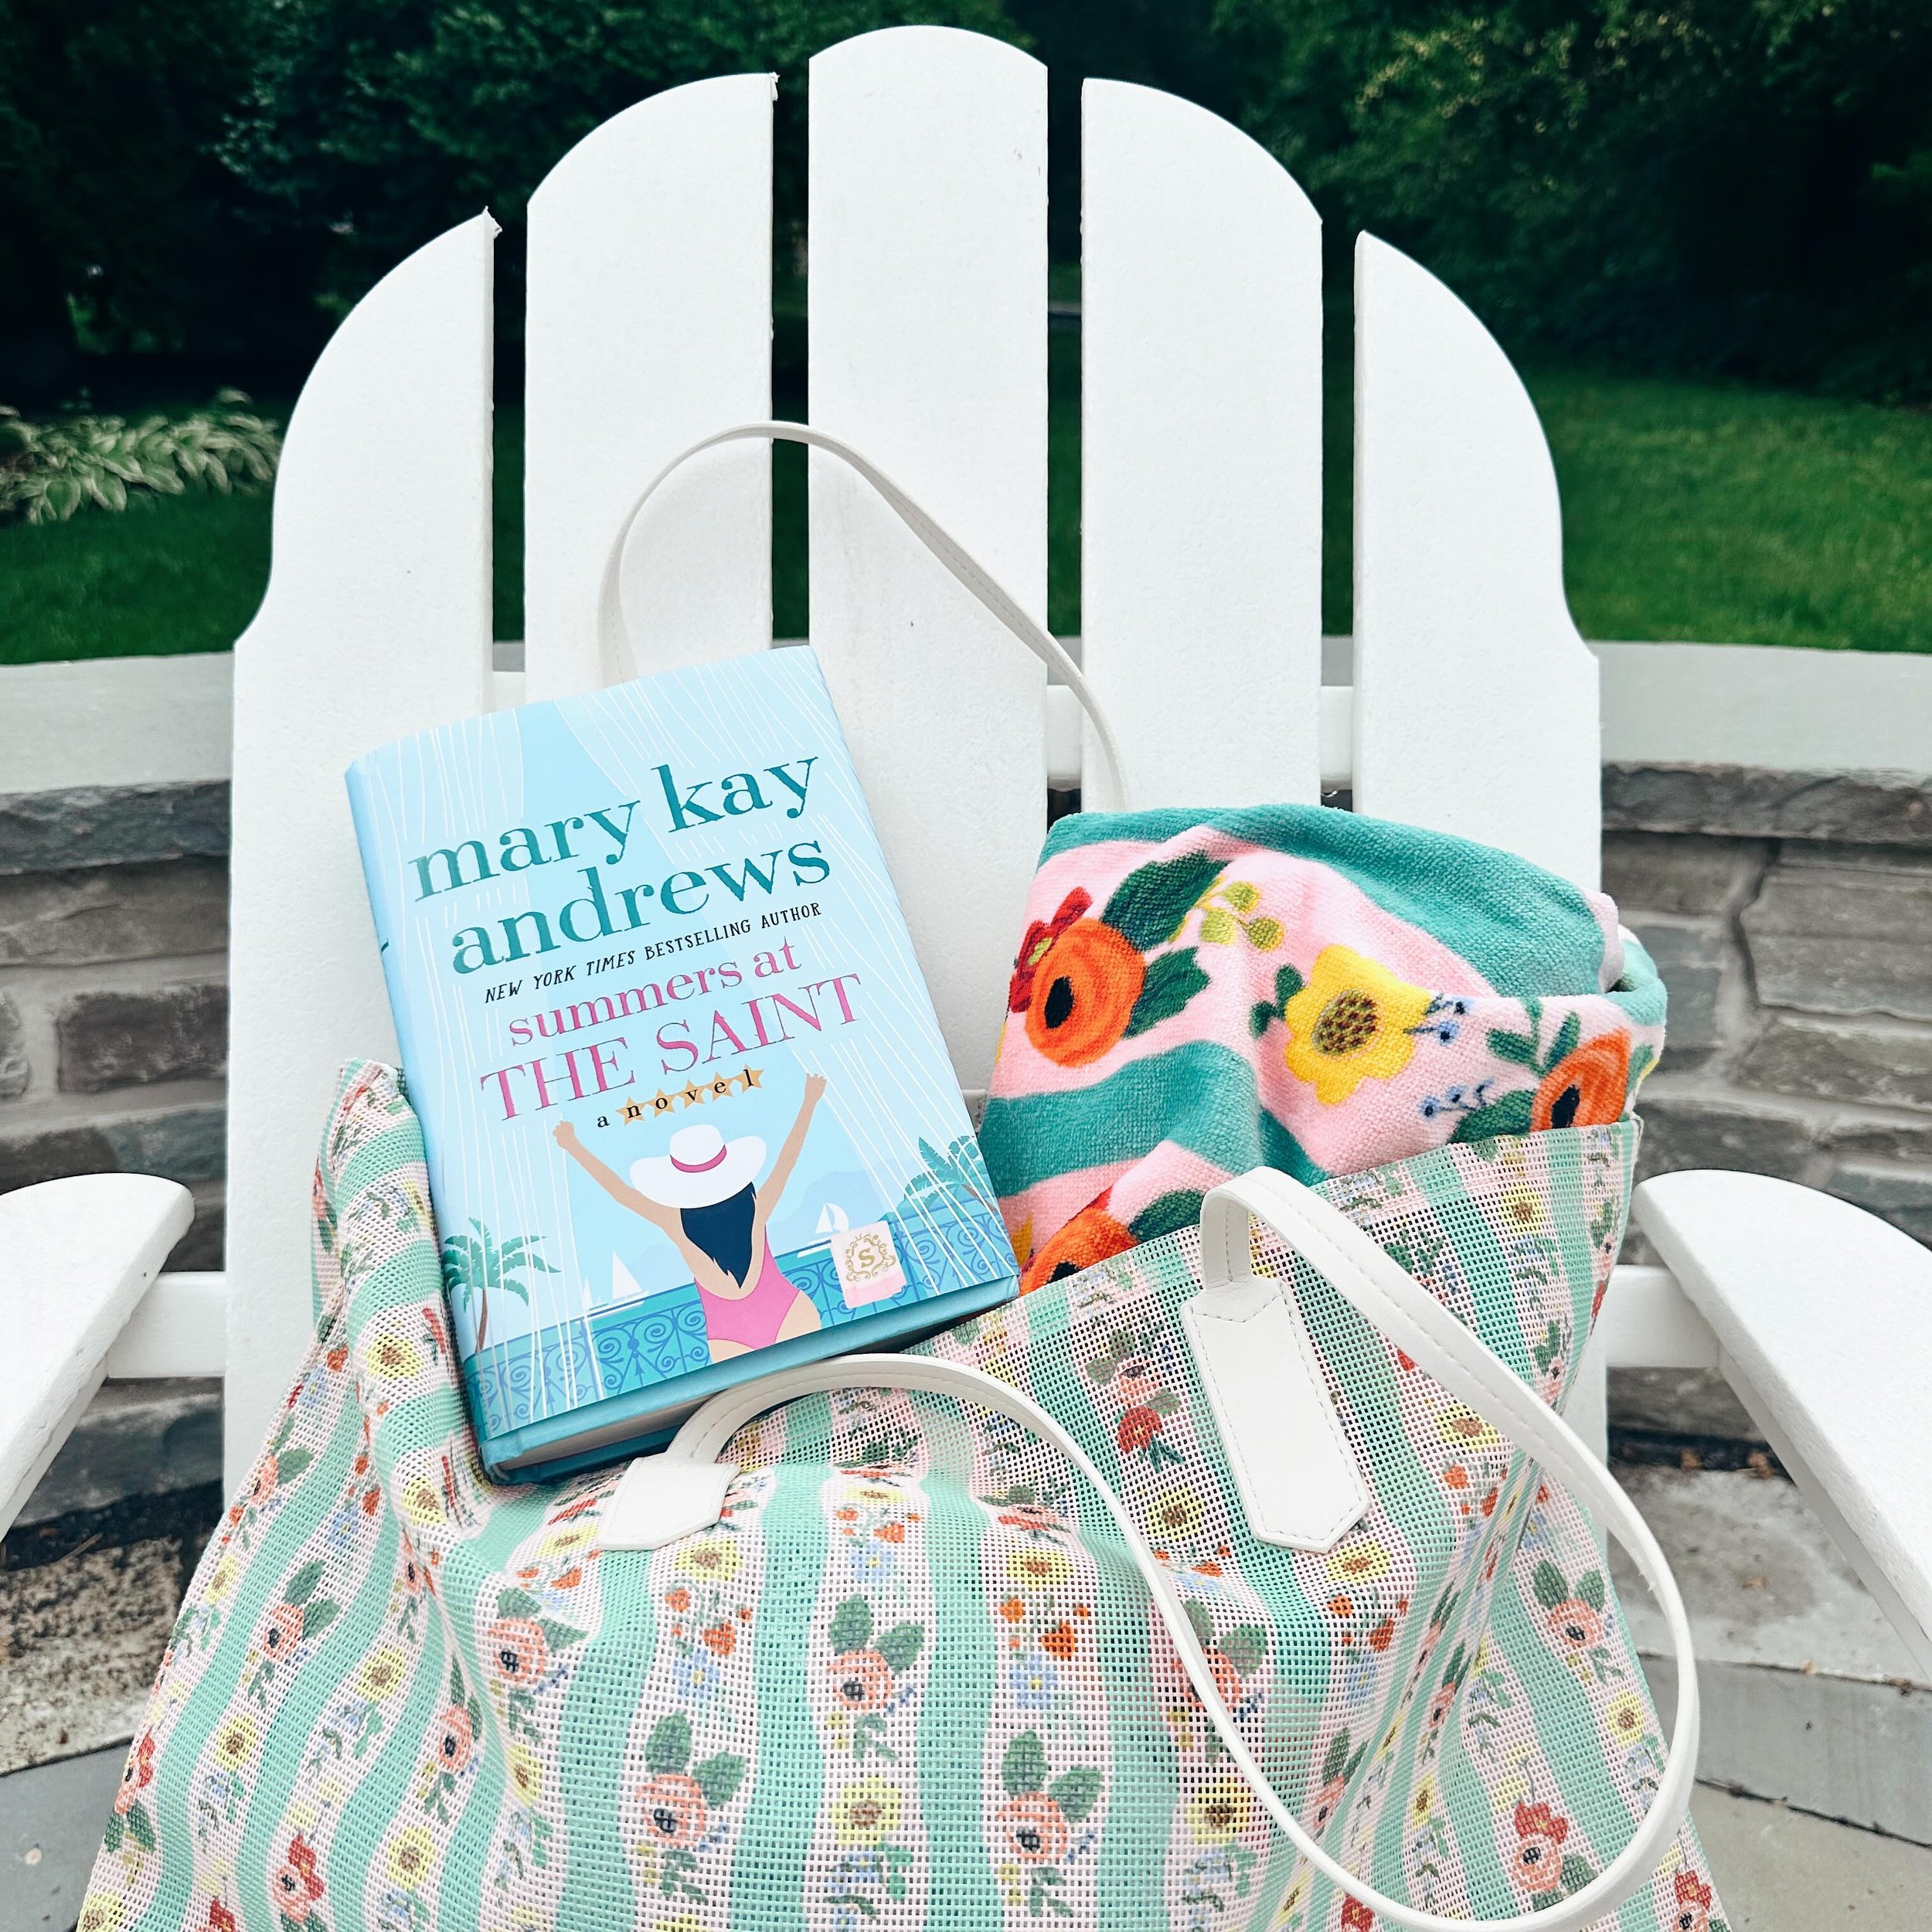 ⭐️⭐️⭐️(3/5)
I wanted something light, fun, and beachy, and this fit the bill. Mary Kay Andrews has been writing books for as long as I&rsquo;ve been alive, and her stories always provide a fun escape. This would be a great buddy read to enjoy on a su